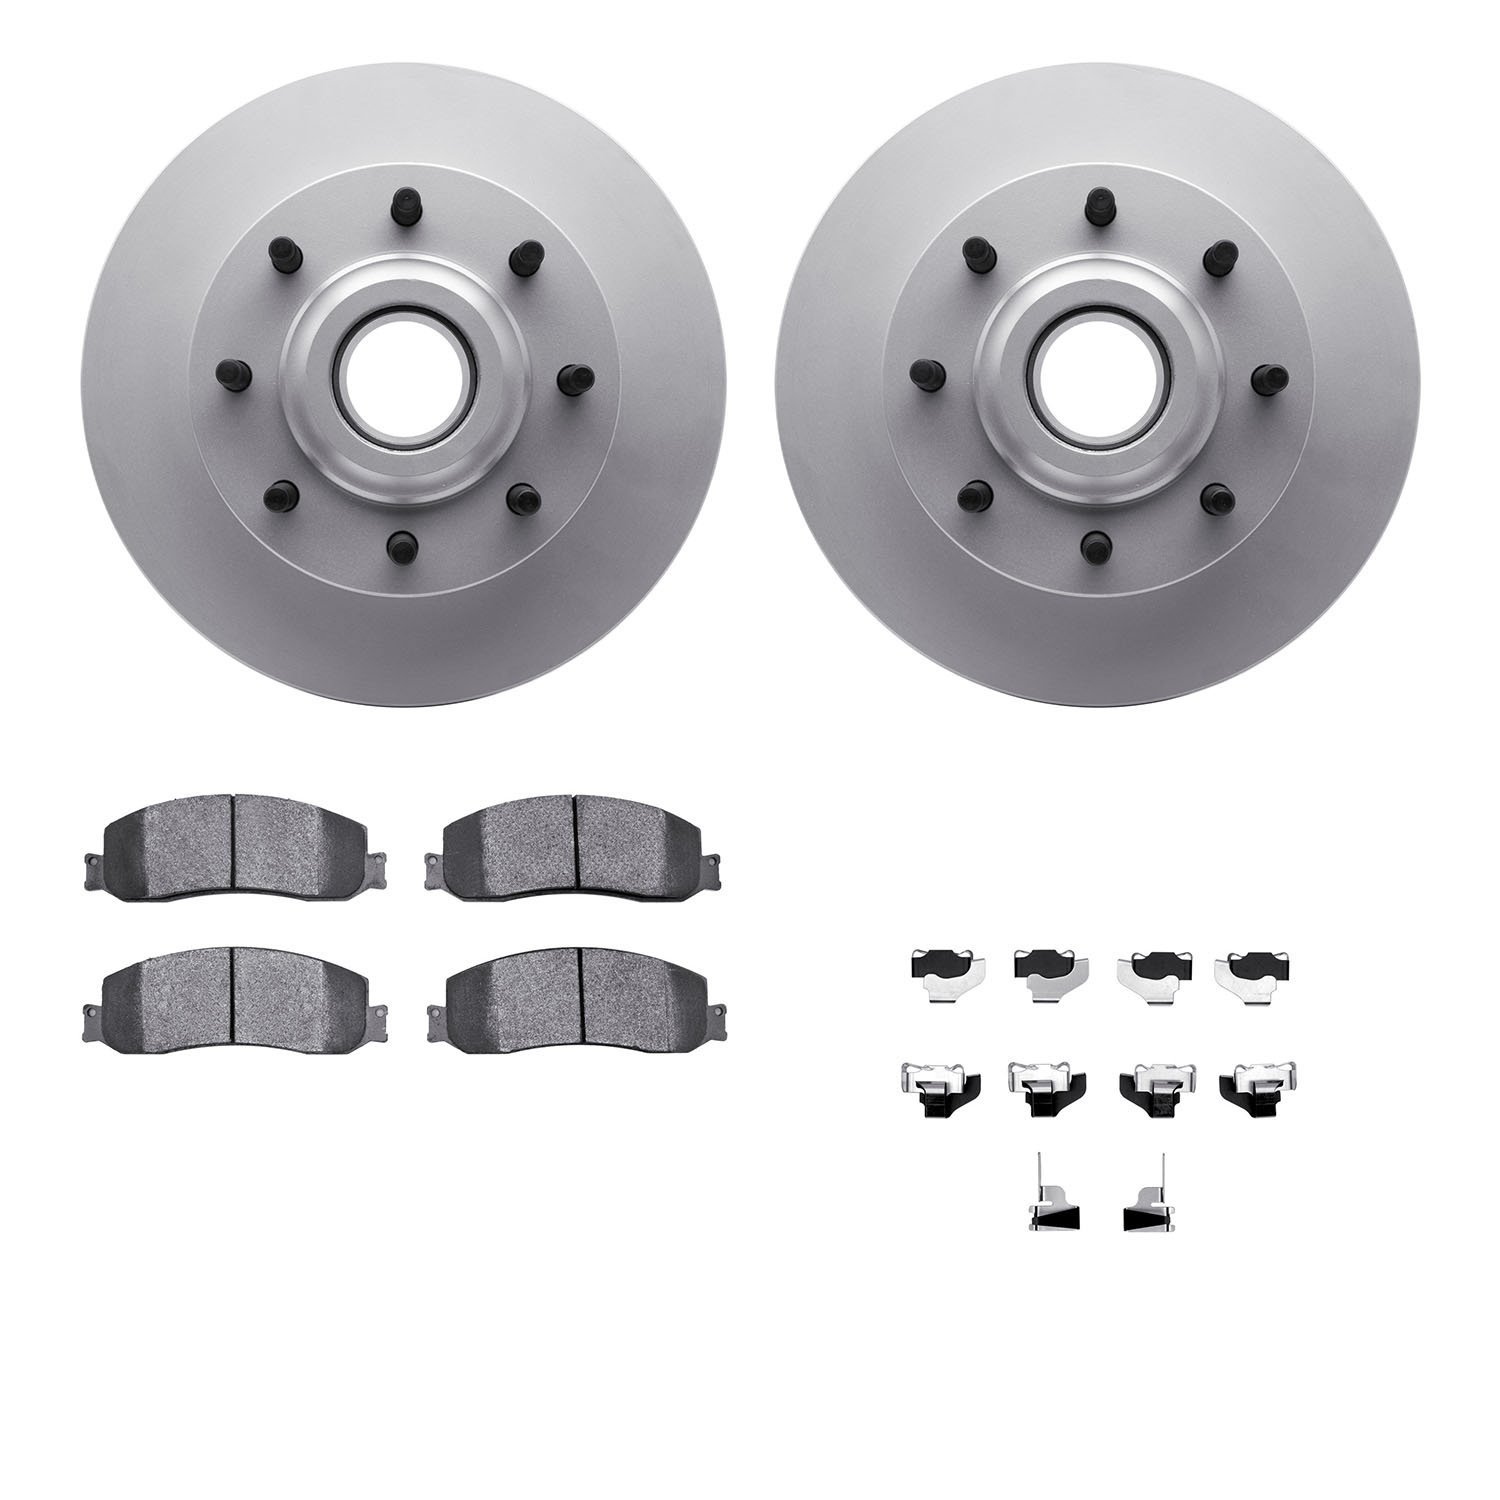 4412-54065 Geospec Brake Rotors with Ultimate-Duty Brake Pads & Hardware, 2012-2012 Ford/Lincoln/Mercury/Mazda, Position: Front